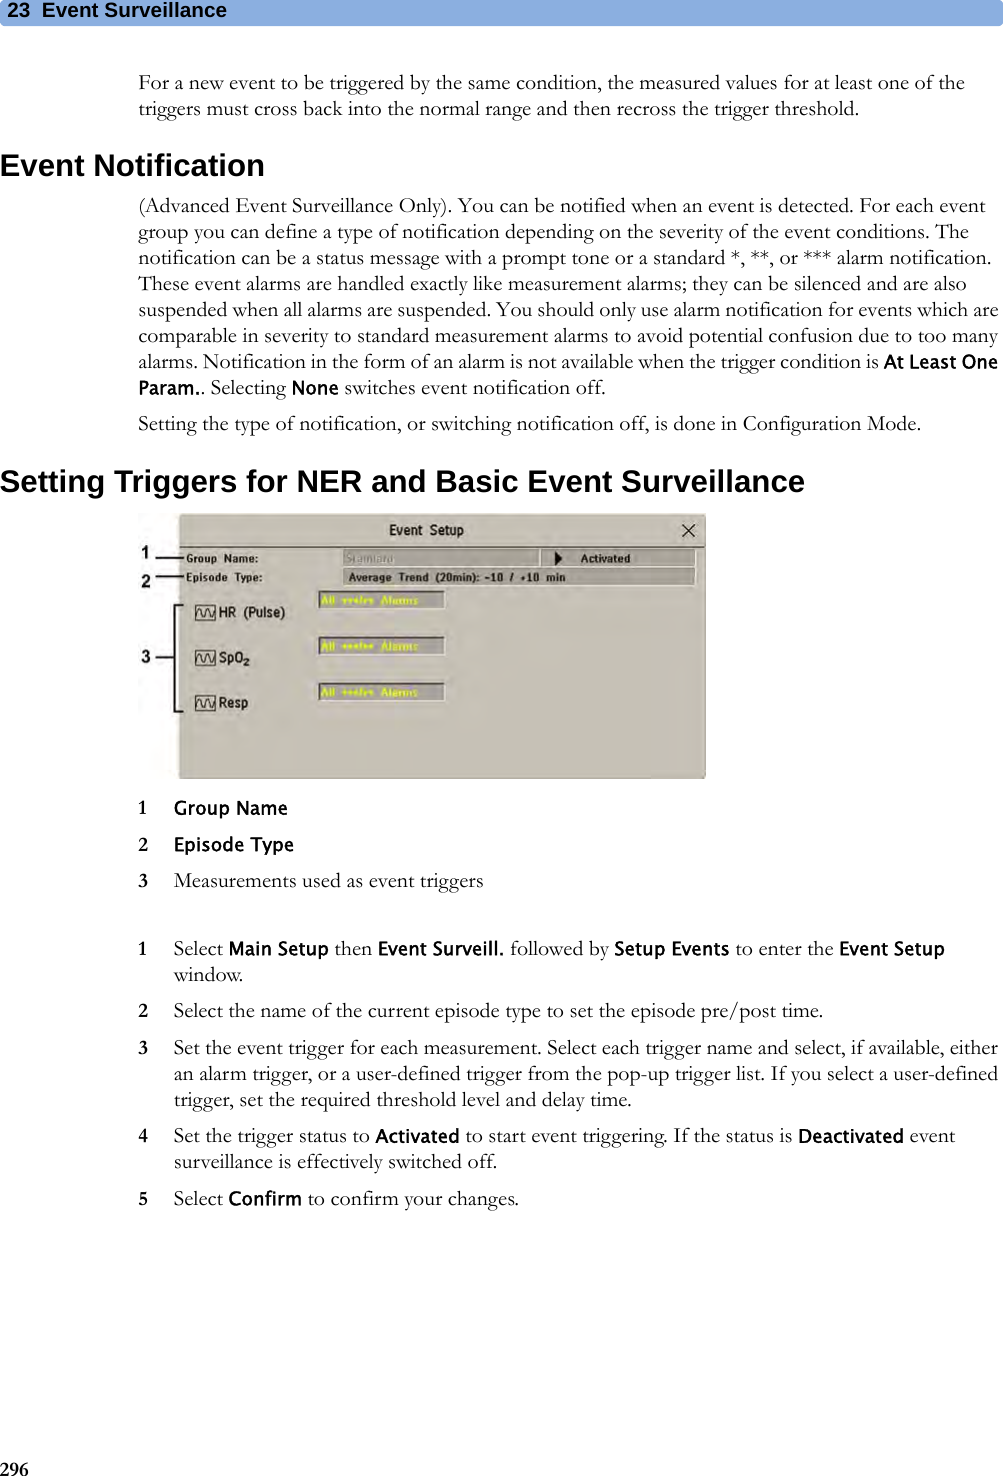 23 Event Surveillance296For a new event to be triggered by the same condition, the measured values for at least one of the triggers must cross back into the normal range and then recross the trigger threshold.Event Notification(Advanced Event Surveillance Only). You can be notified when an event is detected. For each event group you can define a type of notification depending on the severity of the event conditions. The notification can be a status message with a prompt tone or a standard *, **, or *** alarm notification. These event alarms are handled exactly like measurement alarms; they can be silenced and are also suspended when all alarms are suspended. You should only use alarm notification for events which are comparable in severity to standard measurement alarms to avoid potential confusion due to too many alarms. Notification in the form of an alarm is not available when the trigger condition is At Least One Param.. Selecting None switches event notification off.Setting the type of notification, or switching notification off, is done in Configuration Mode.Setting Triggers for NER and Basic Event Surveillance1Group Name2Episode Type3Measurements used as event triggers1Select Main Setup then Event Surveill. followed by Setup Events to enter the Event Setup window.2Select the name of the current episode type to set the episode pre/post time.3Set the event trigger for each measurement. Select each trigger name and select, if available, either an alarm trigger, or a user-defined trigger from the pop-up trigger list. If you select a user-defined trigger, set the required threshold level and delay time.4Set the trigger status to Activated to start event triggering. If the status is Deactivated event surveillance is effectively switched off.5Select Confirm to confirm your changes.